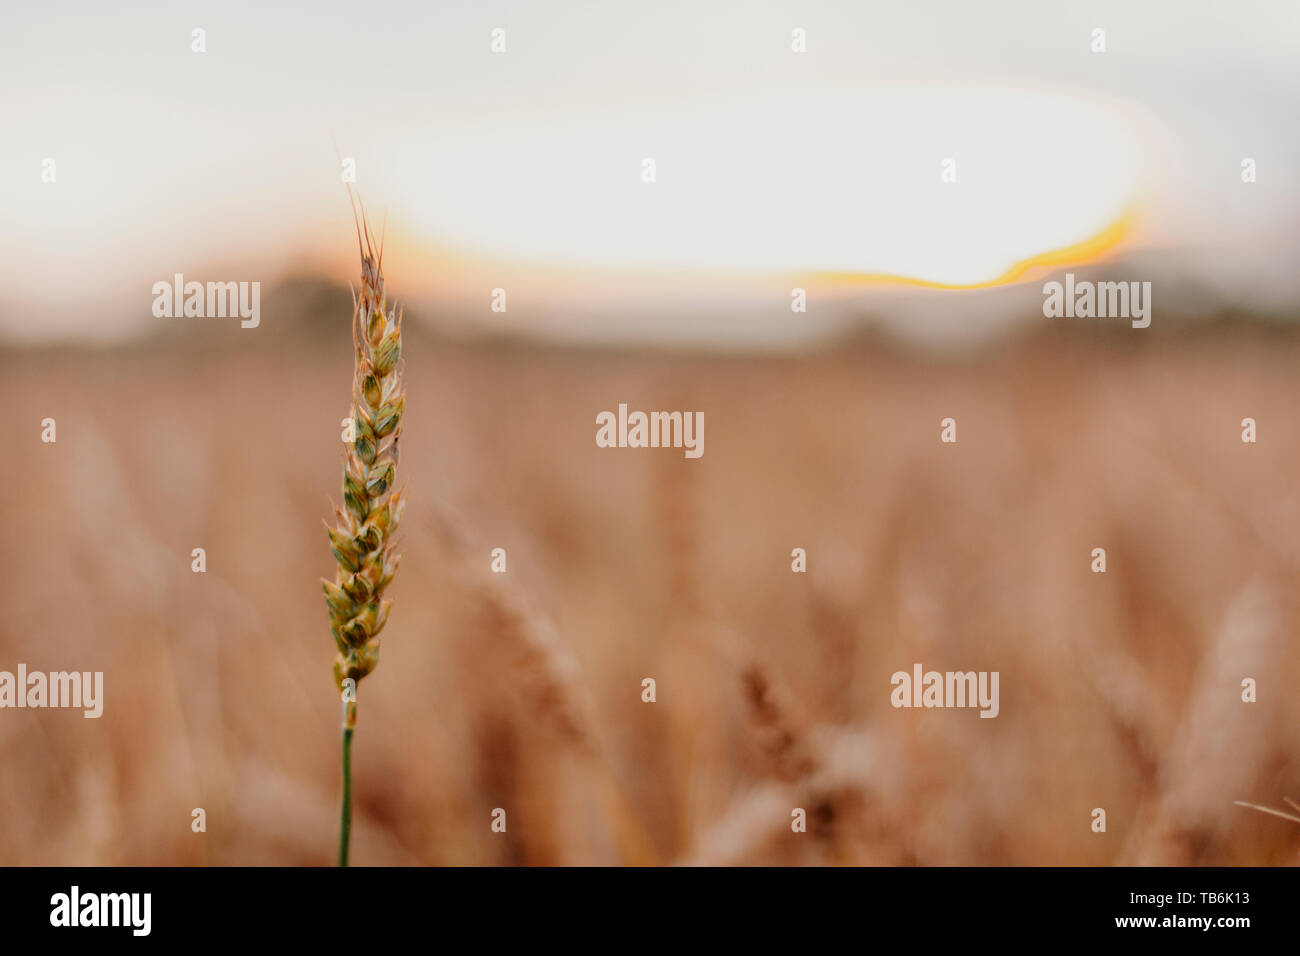 Wheat field in Russia on the natural sunset background, close up Stock Photo